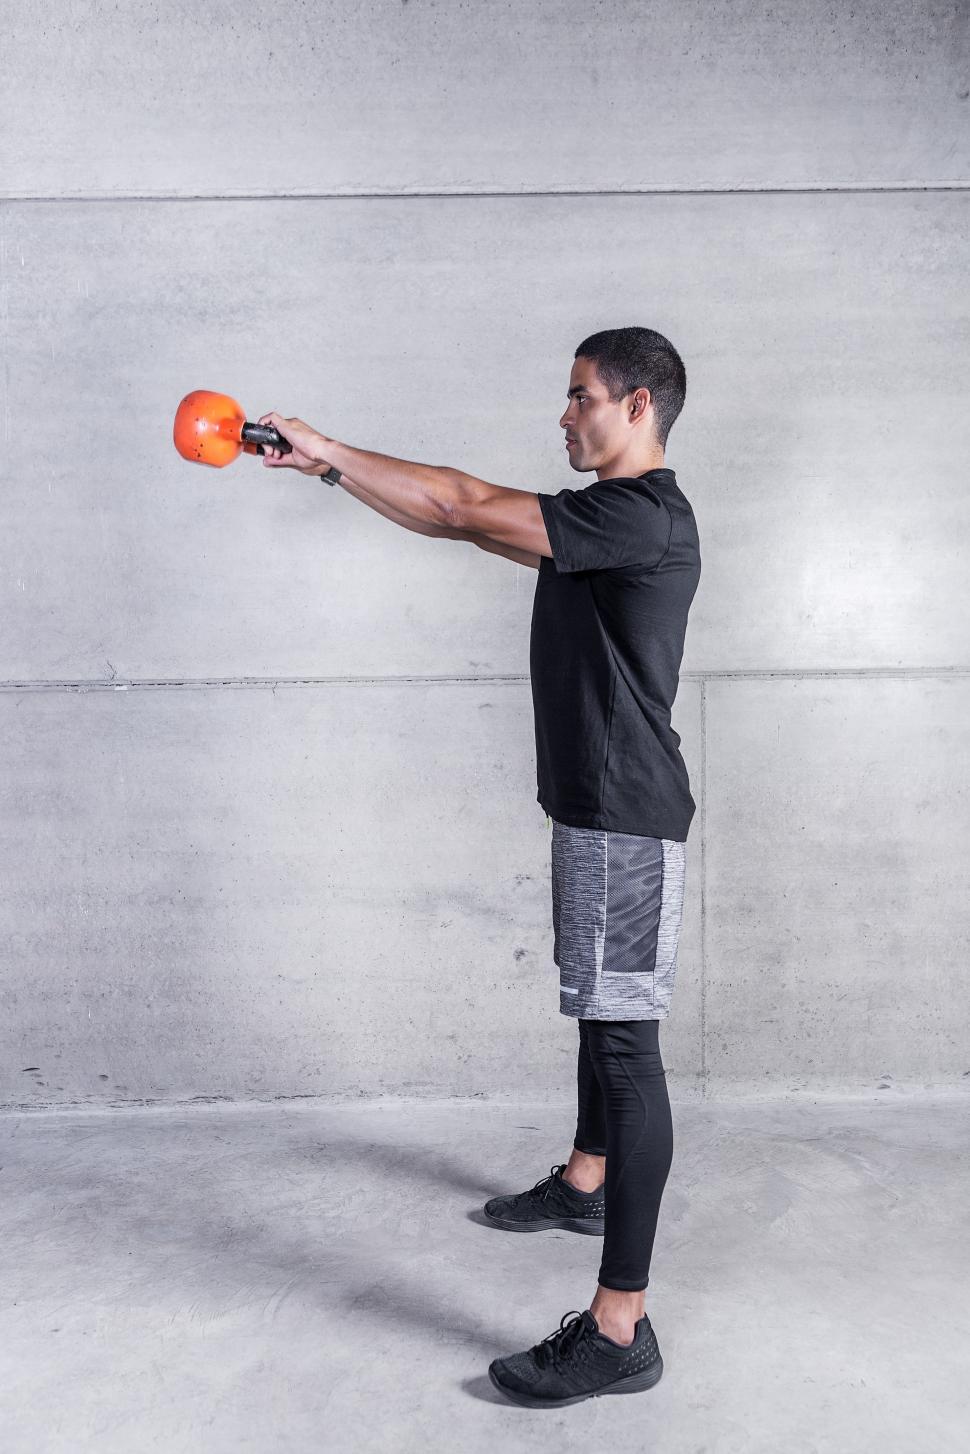 Download Free Stock Photo of Man doing kettlebell swings 